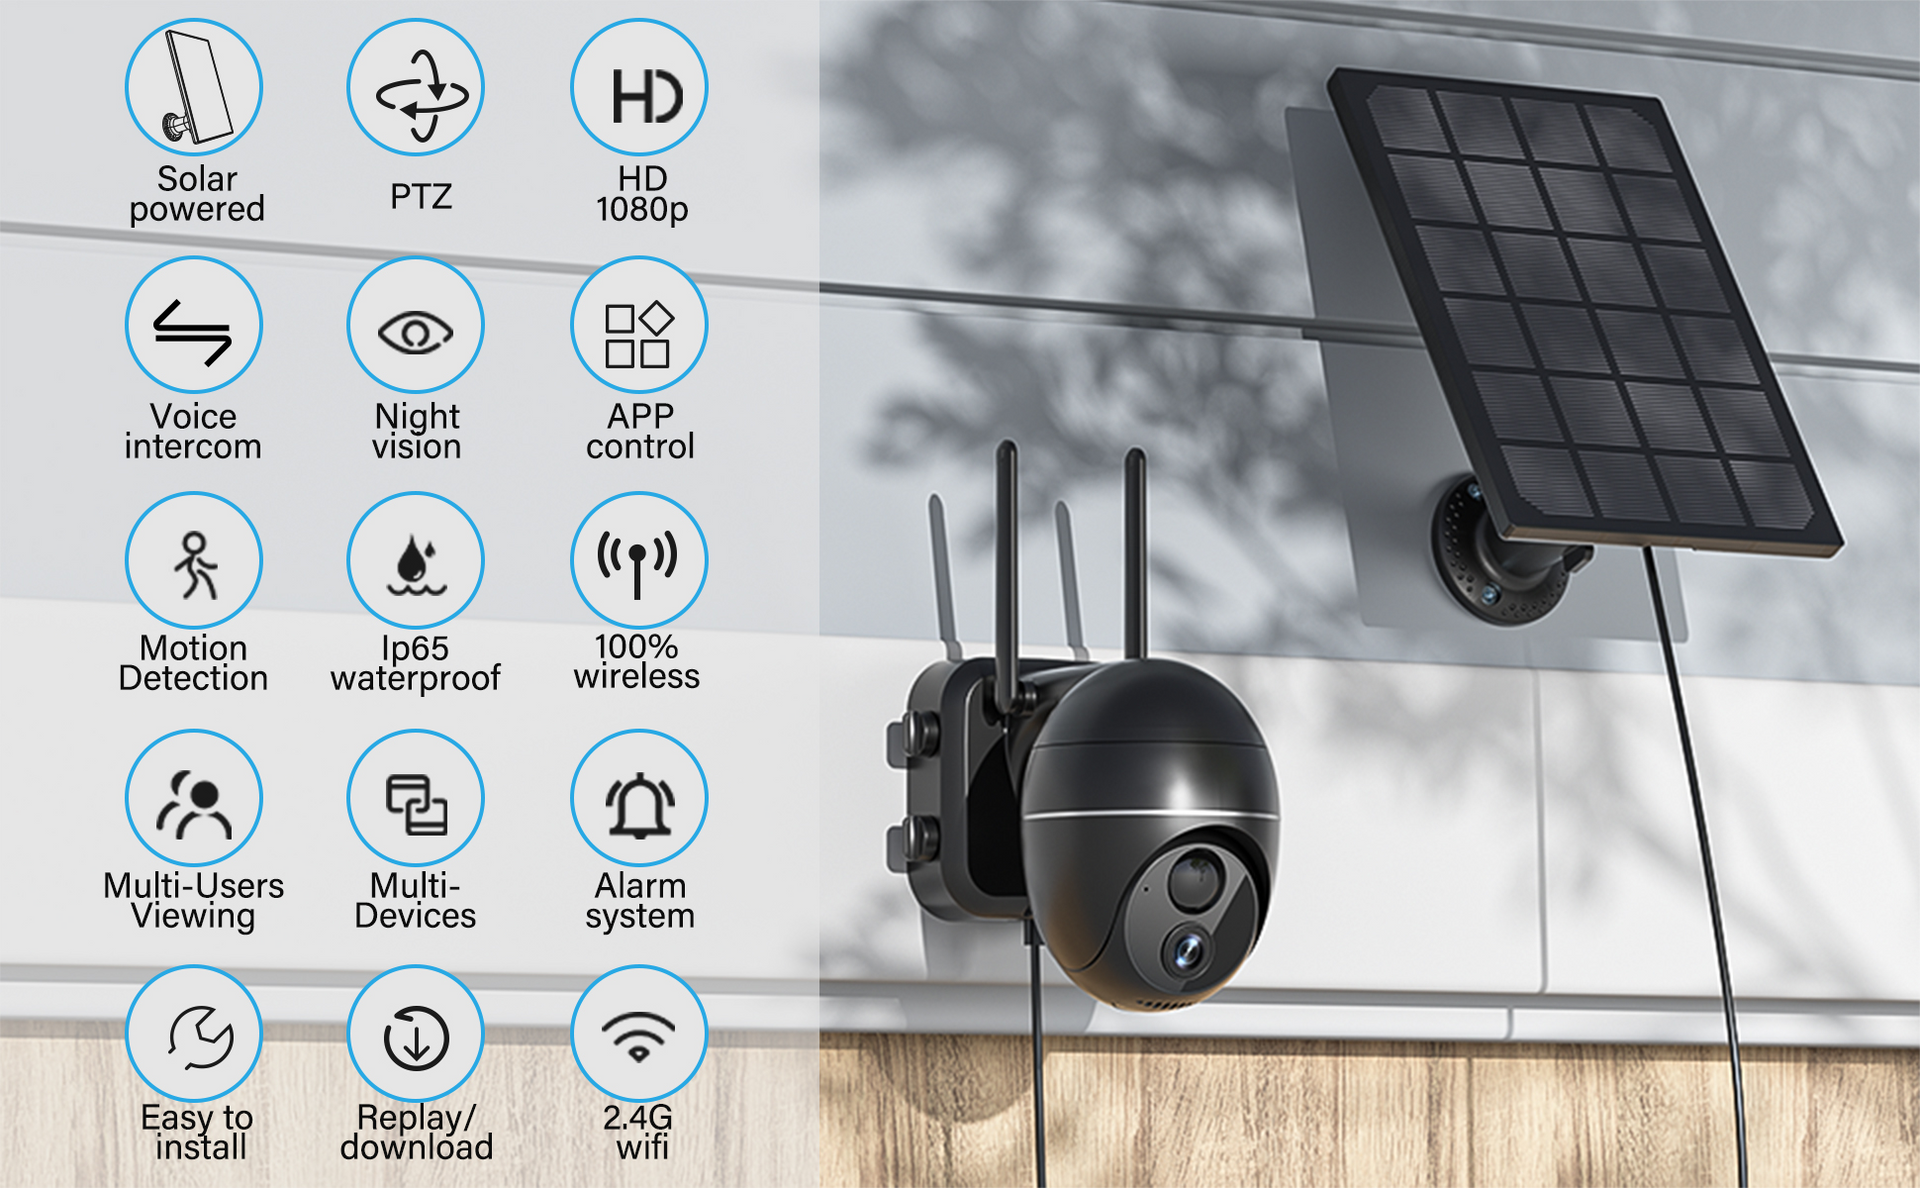 Load video: Elemage ZS-GX4S 1080p HD Solar Outdoor Security Camera Video